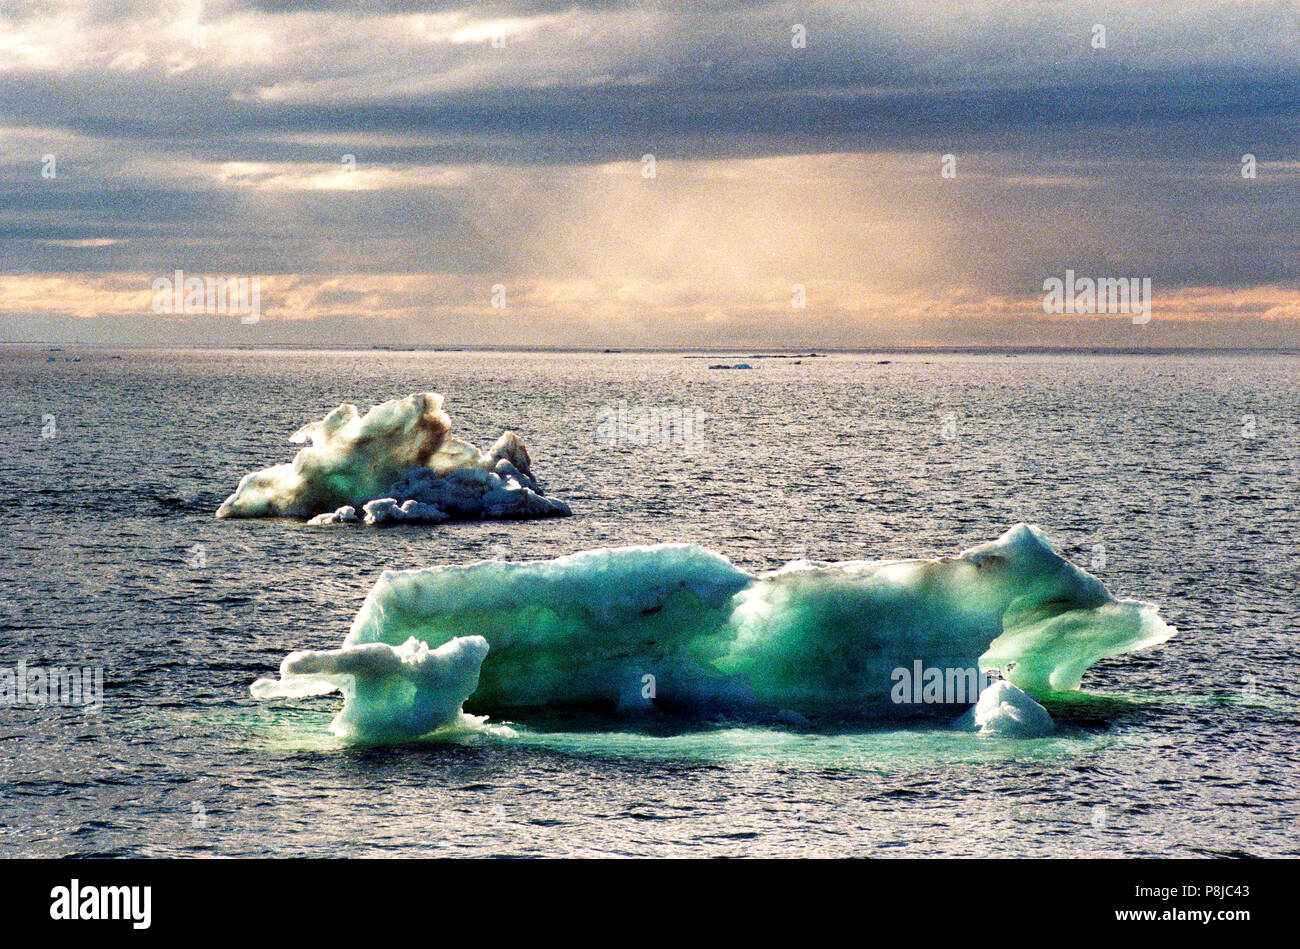 Beaufort Sea in the north of Alaska / US, oil exploration area. A single ice floe floats on the water. Stock Photo